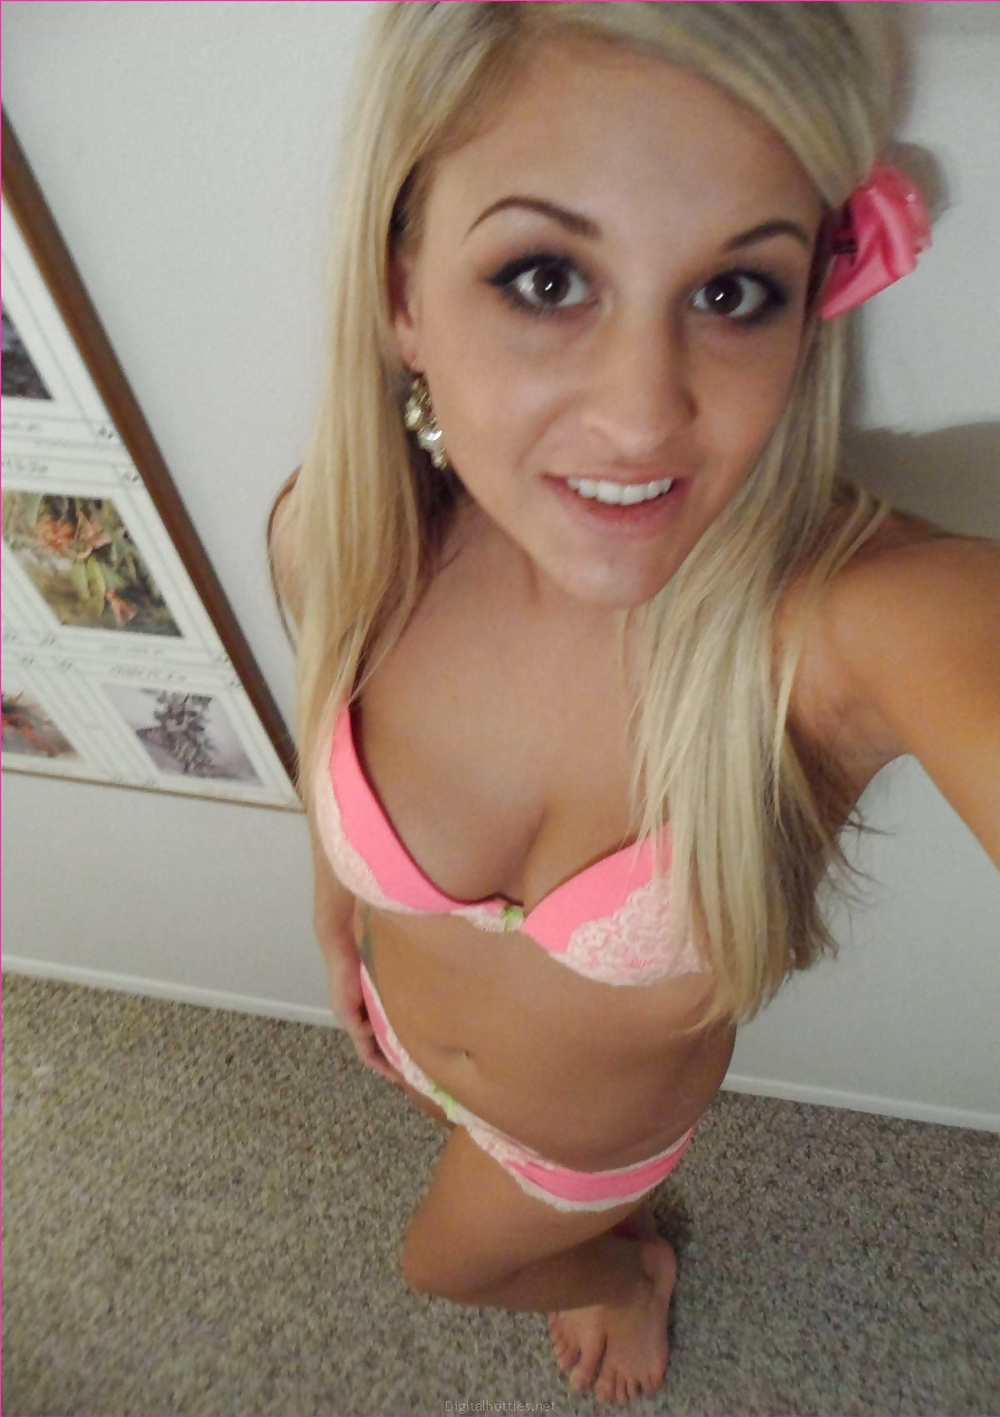 Blonde Teen And Her Toys vol.1 22